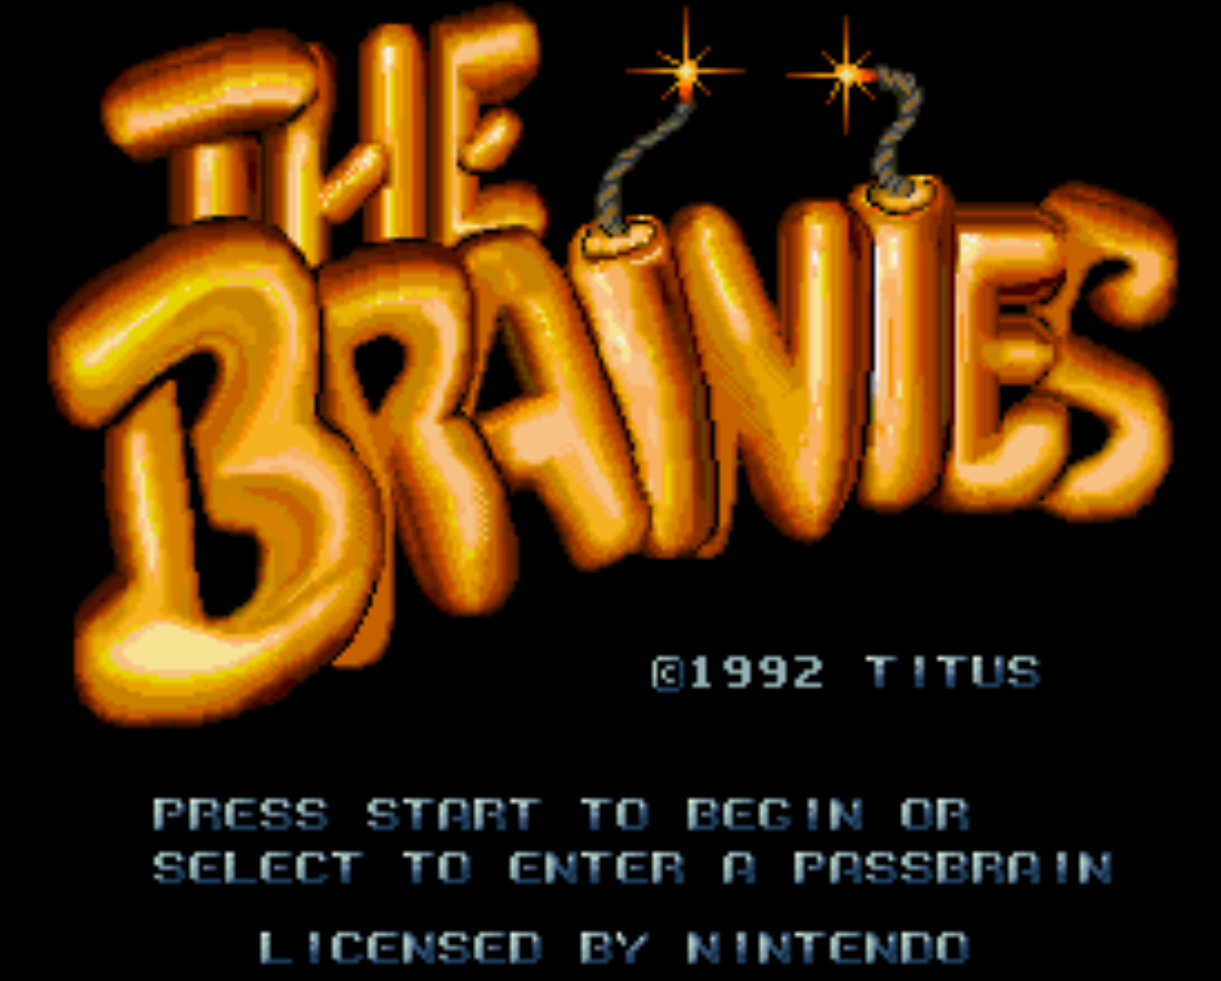 The Brainies Title Screen